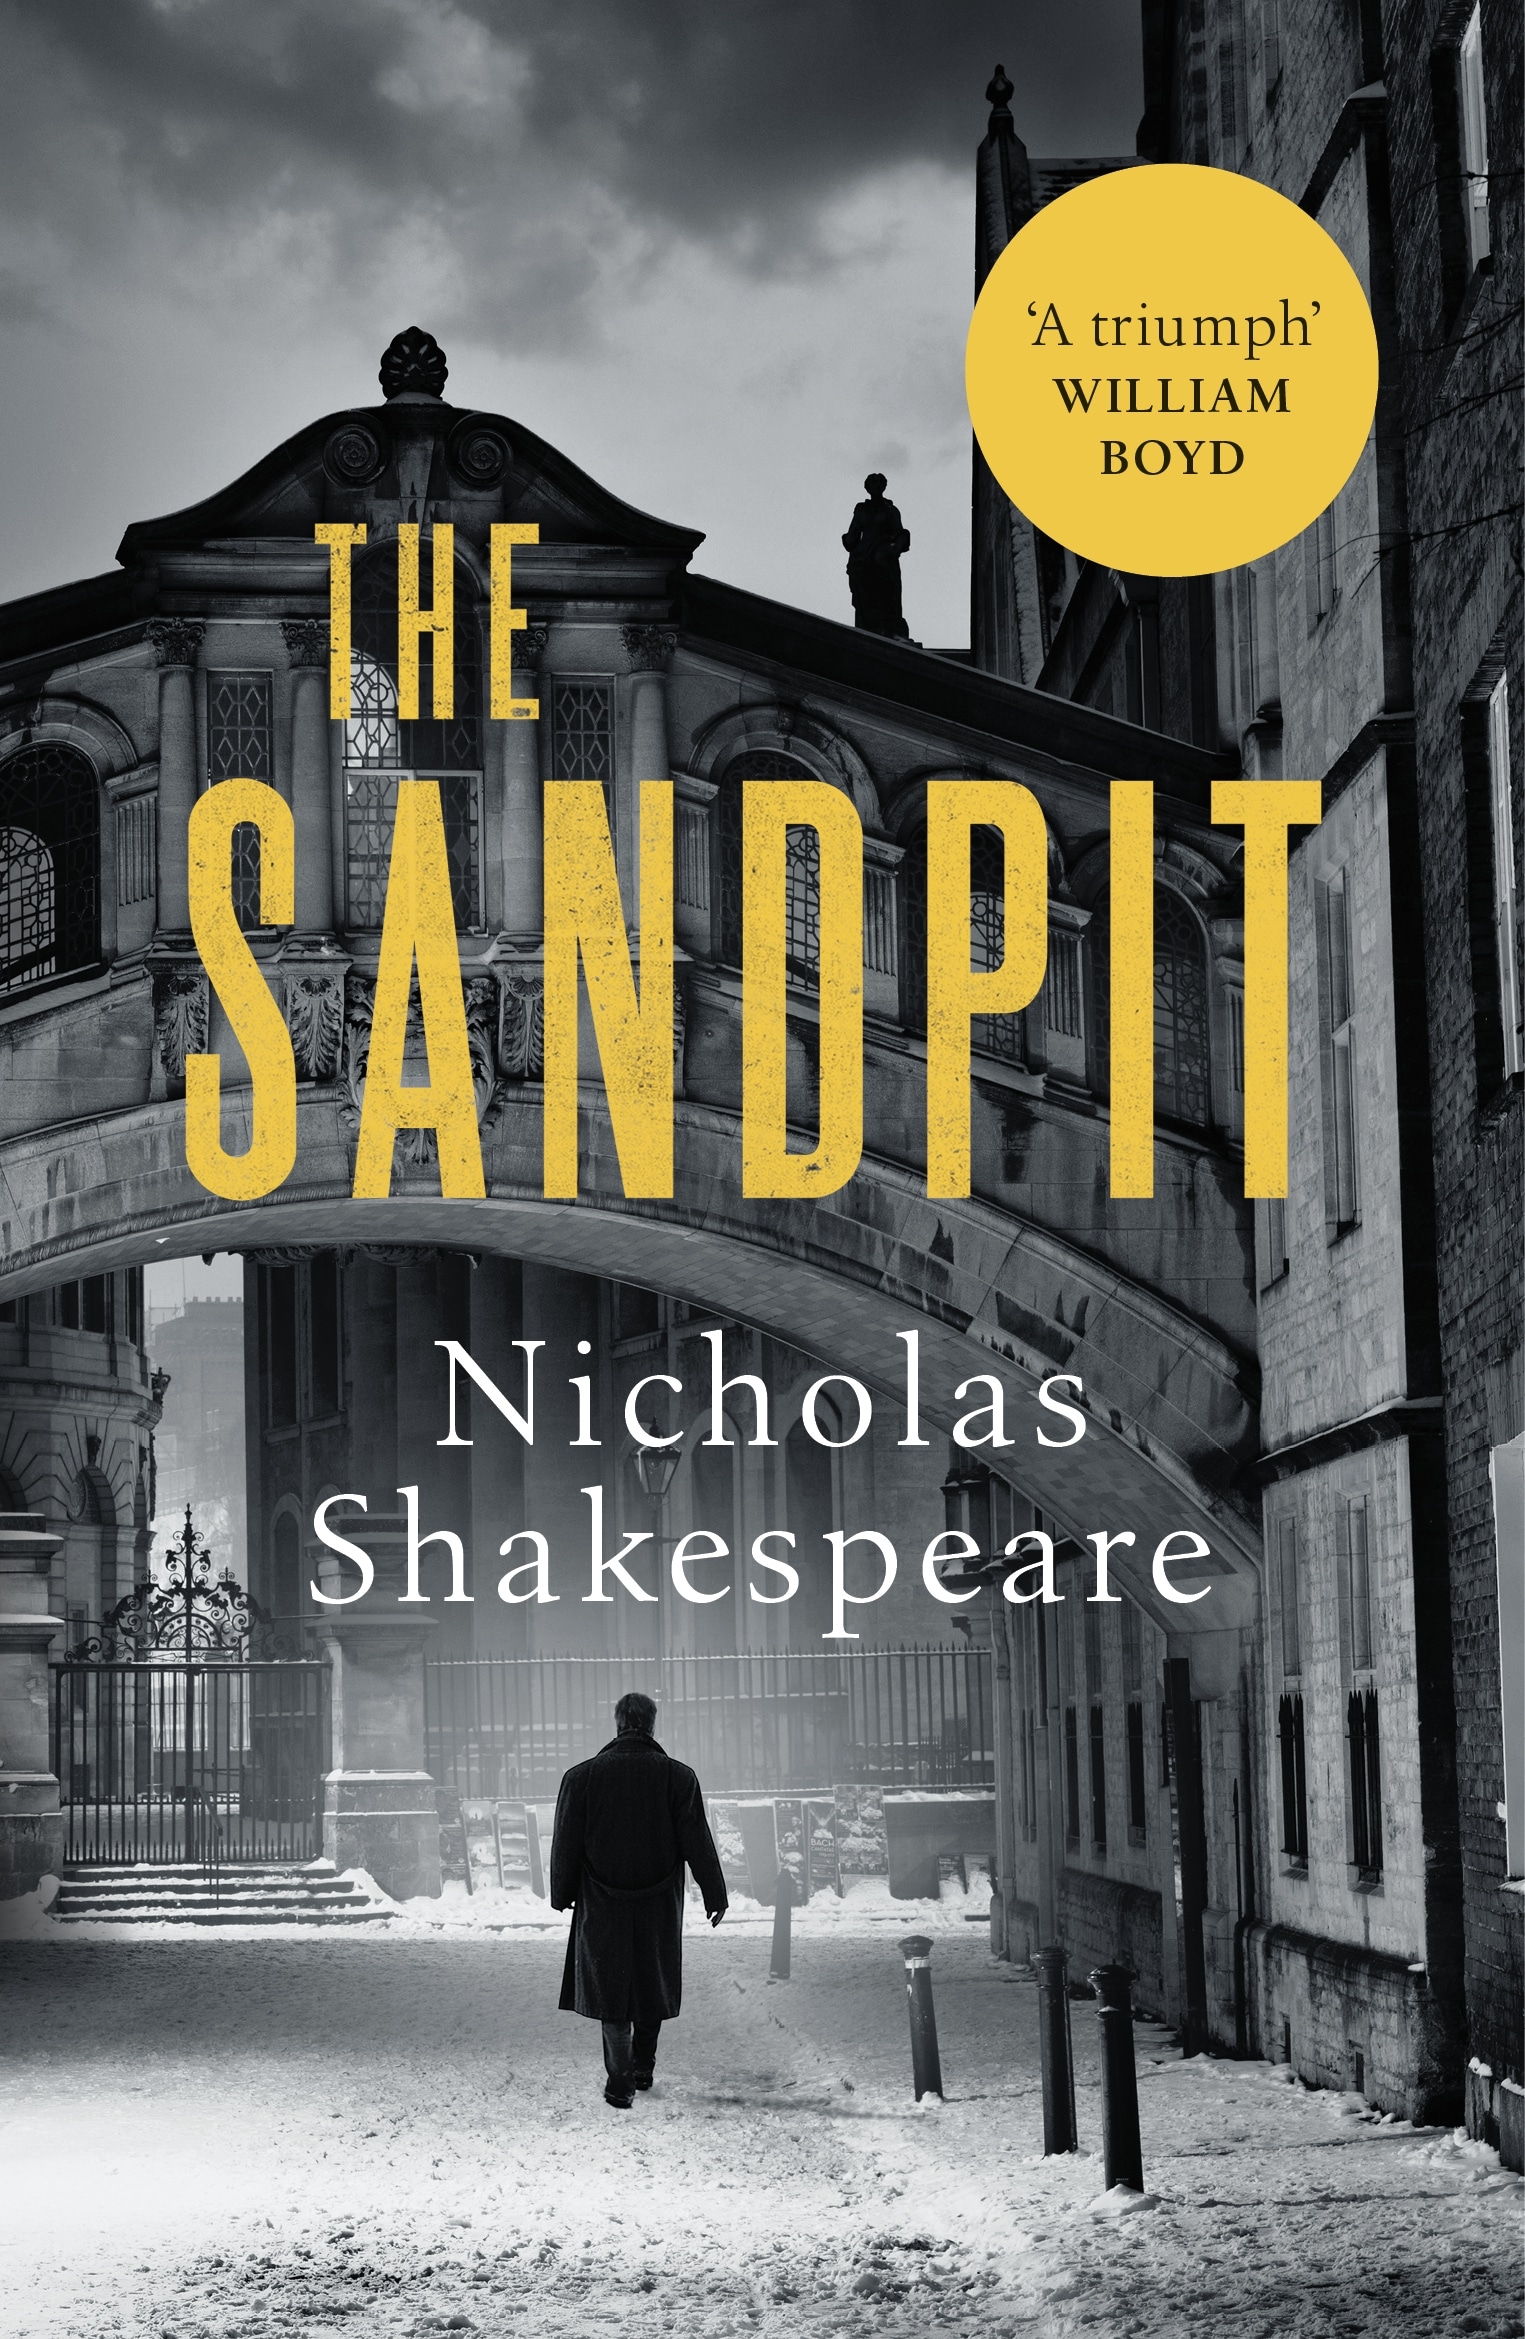 Book “The Sandpit” by Nicholas Shakespeare — July 22, 2021